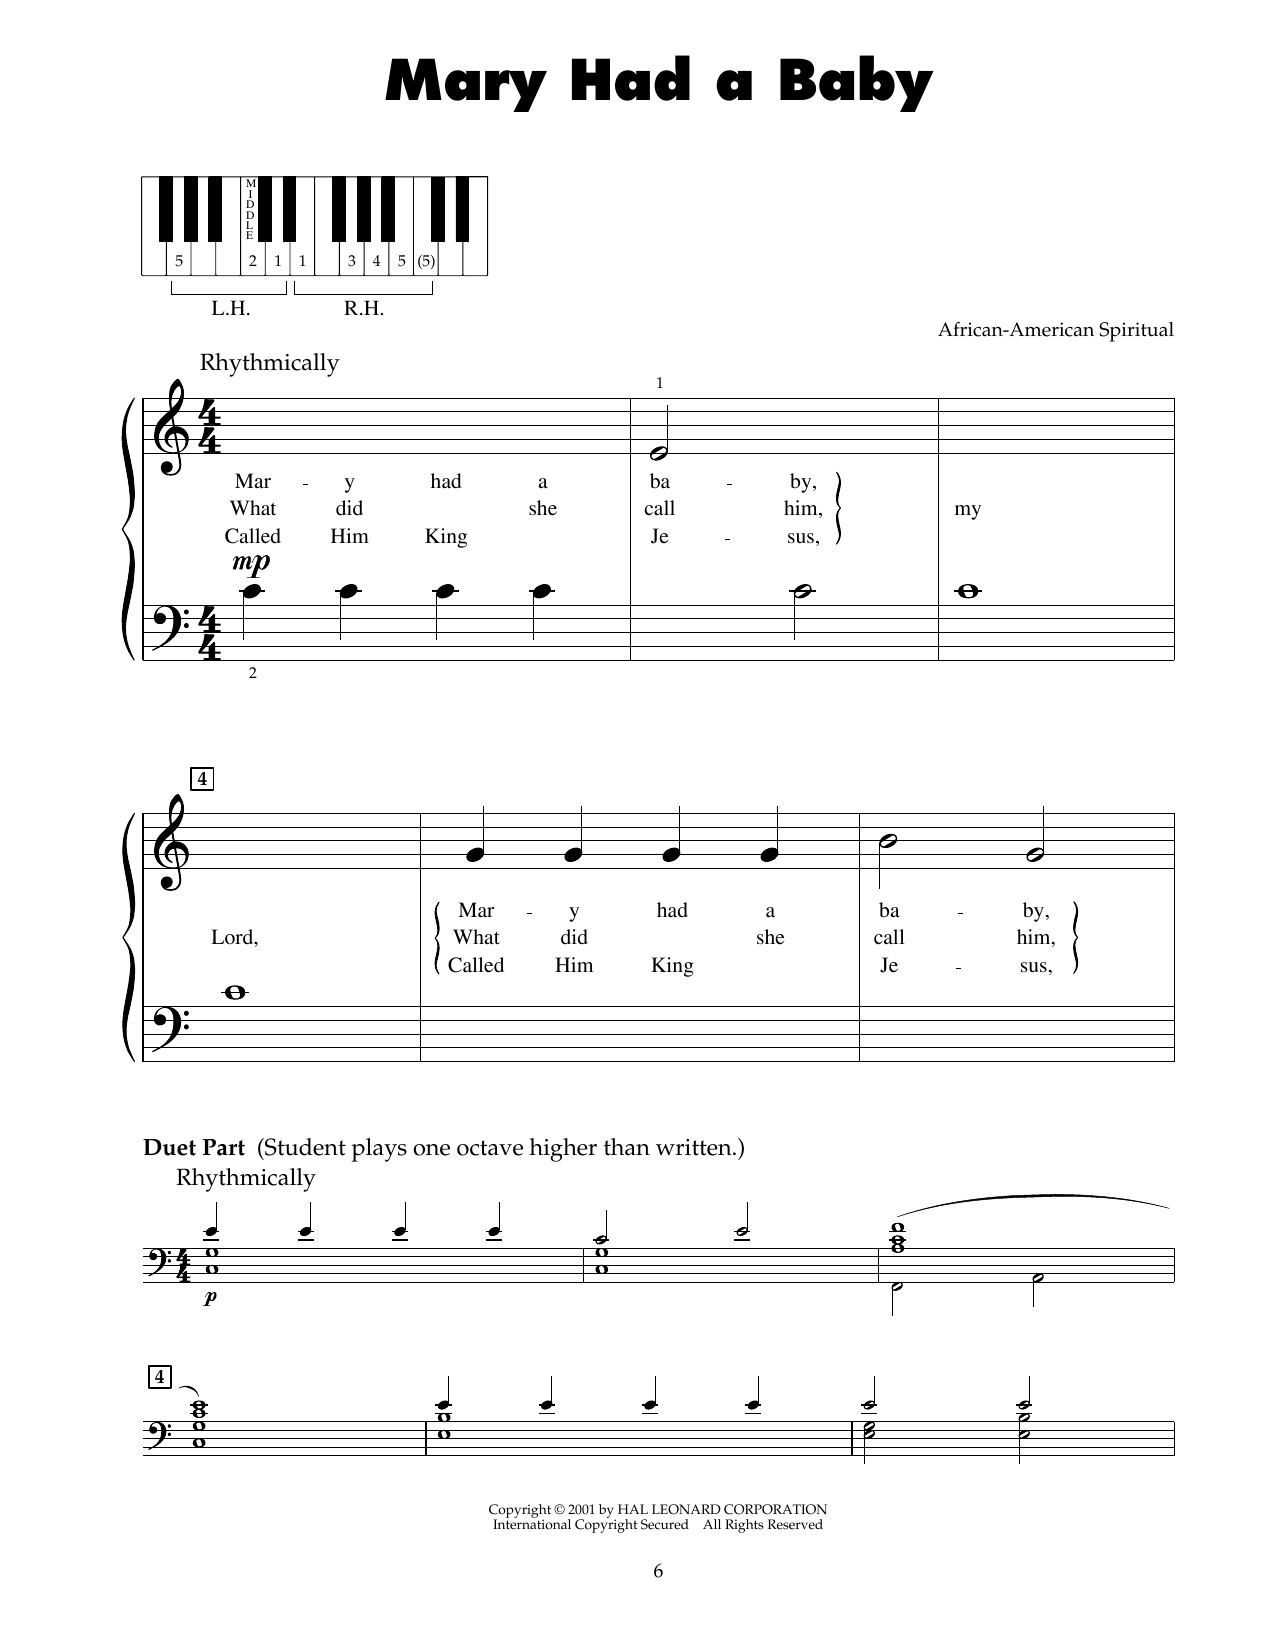 Download African-American Spiritual Mary Had A Baby Sheet Music